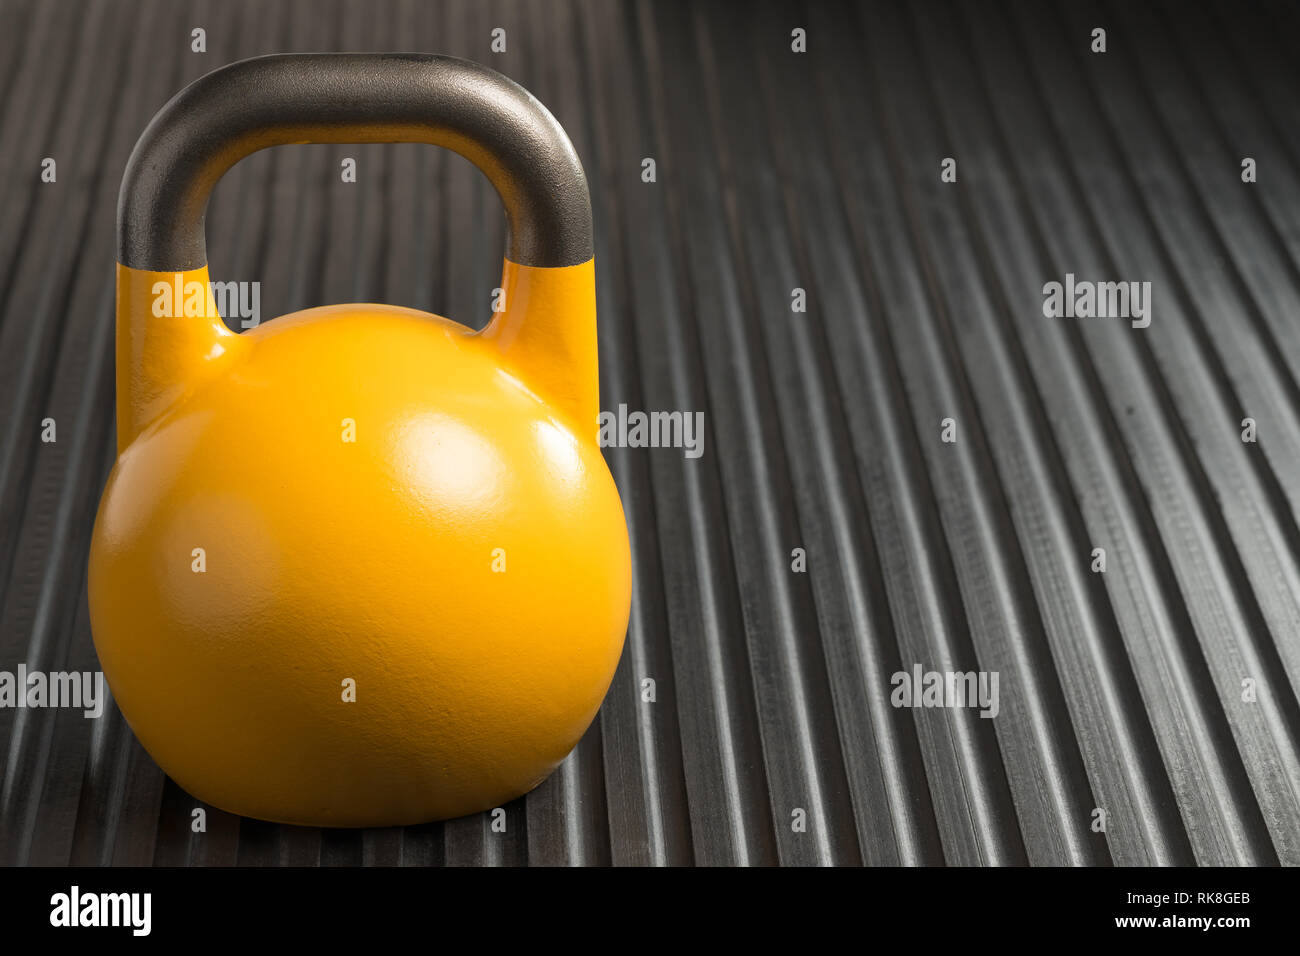 Yellow 16kg weight lifting kettlebell inside a gym. Copy space to the right of kettlebell. Stock Photo